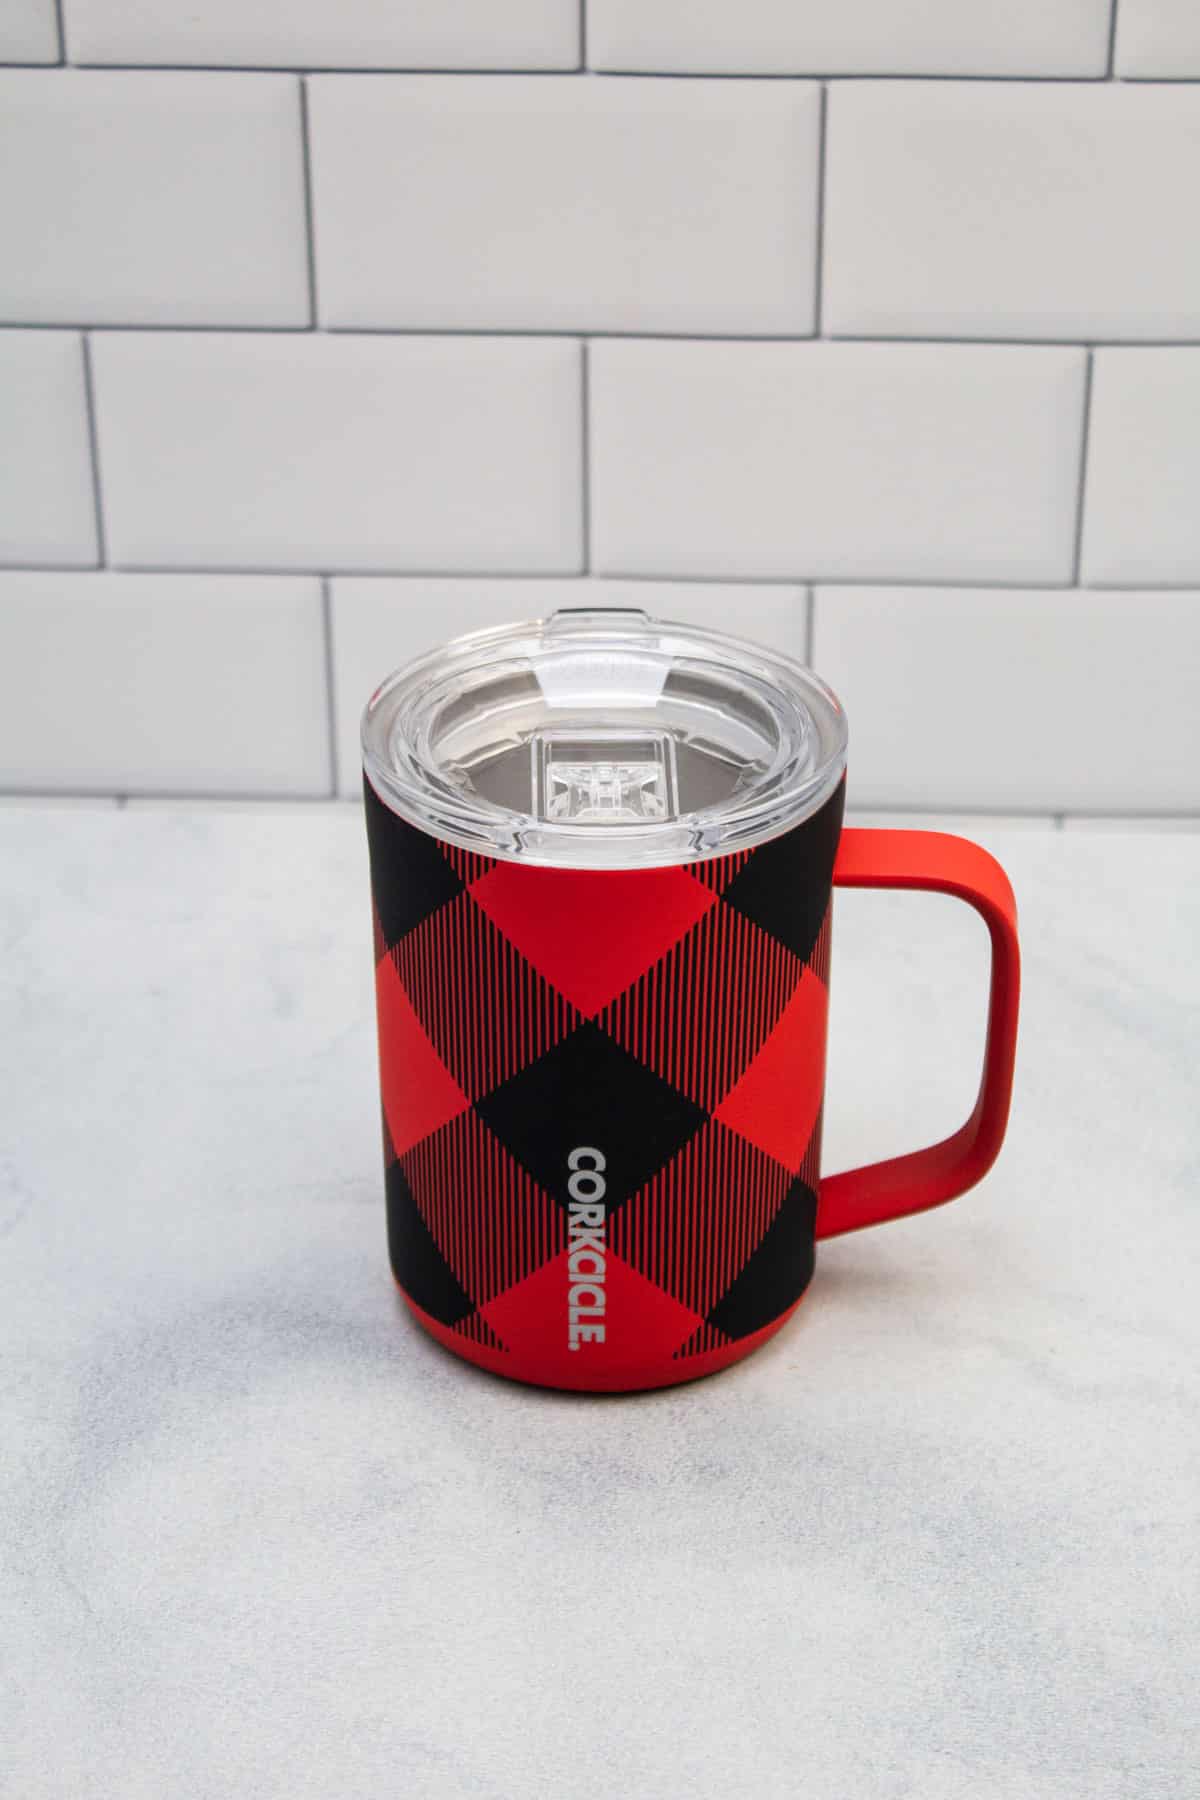 Insulated plaid patterned coffee mug with lid.